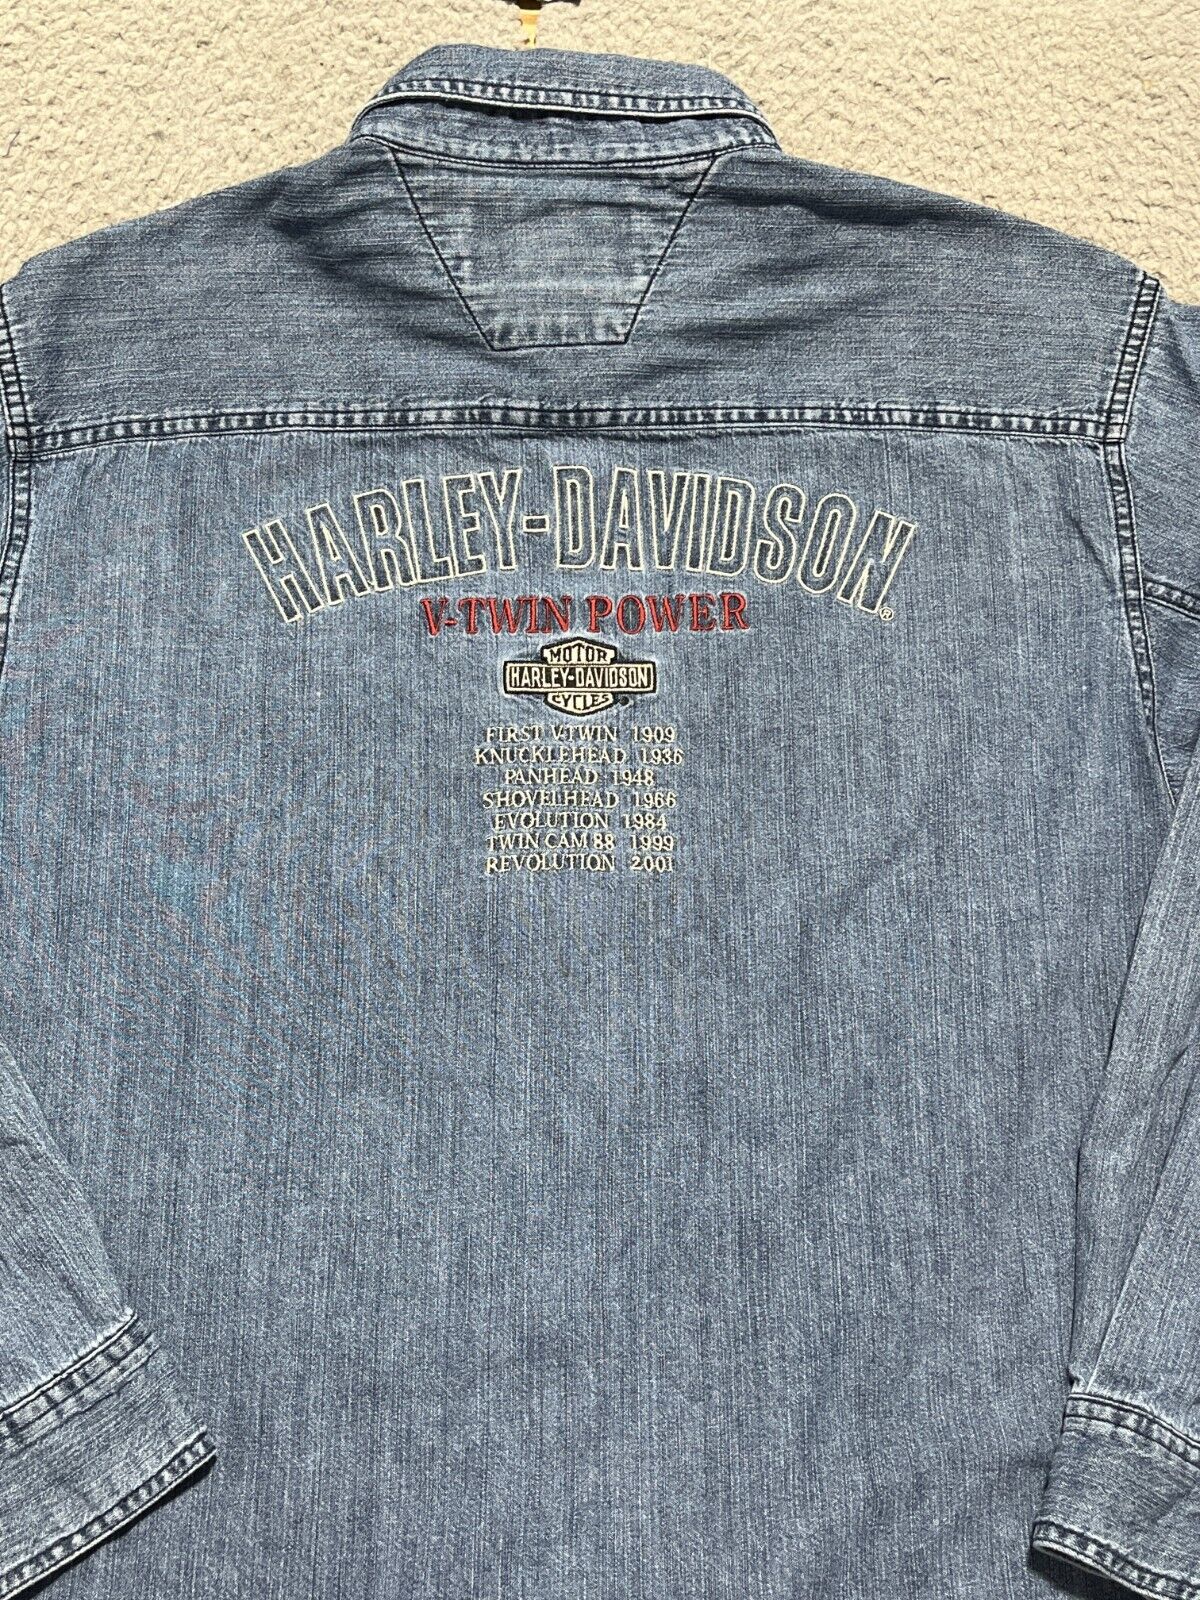 Harley-Davidson Shirt Mens Lg Blue Button Down Denim Embroidered Double Sided